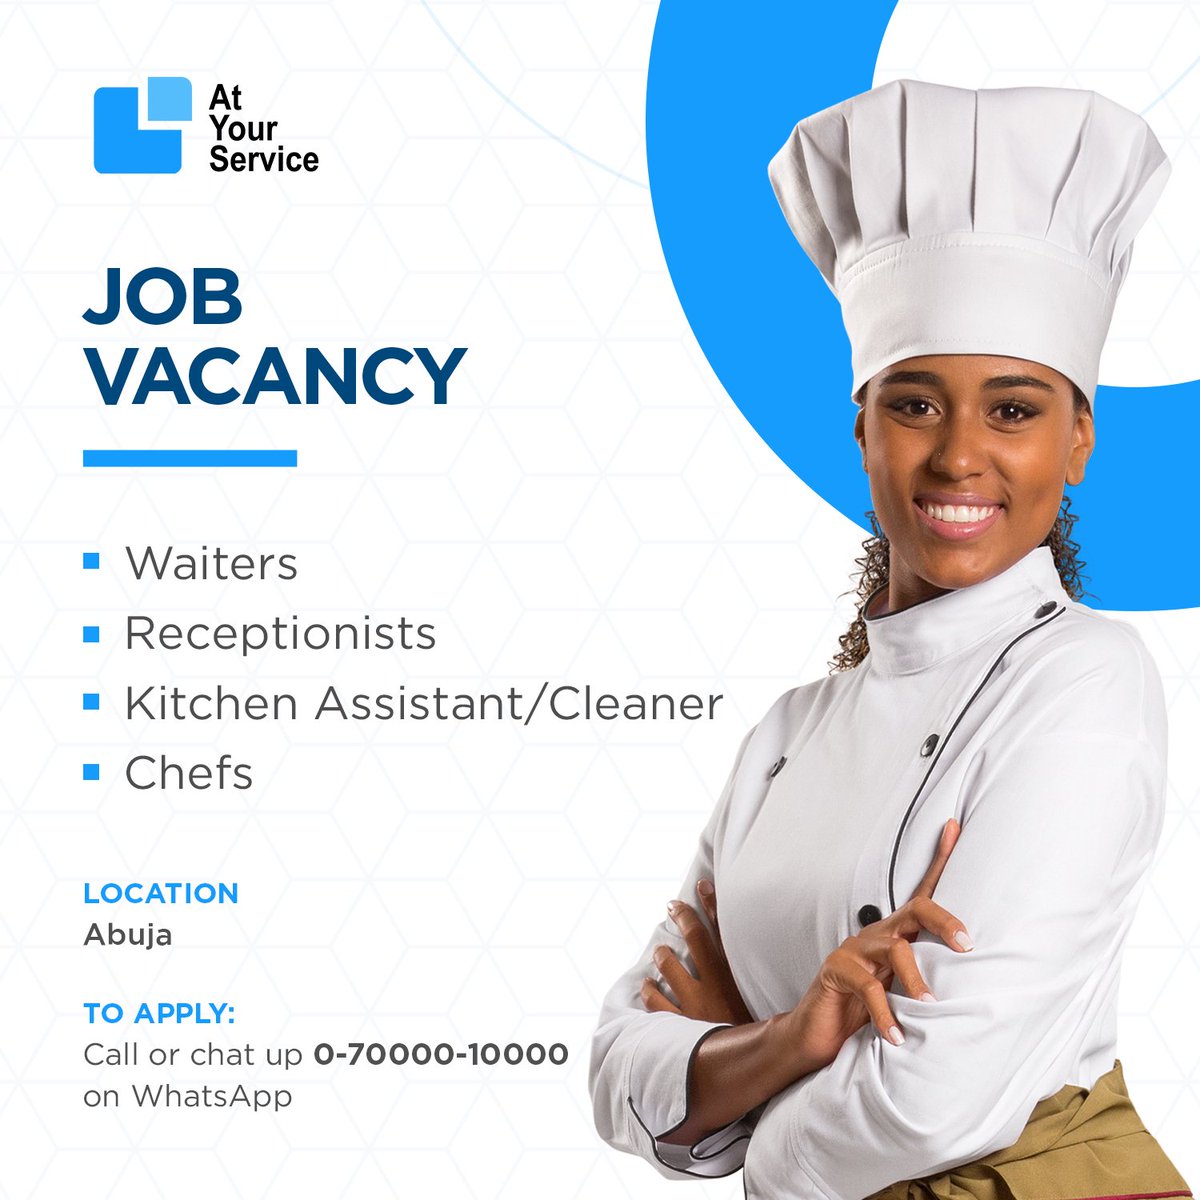 A new restaurant in #Abuja is urgently looking to fill these roles: 
- Chef
- Waiter
- Kitchen Assistant 
- Receptionist.

If you are qualified for any of these roles, please contact us on 0-70000-10000 or you can be a good friend and refer someone you know.

#CurrentlyHiring